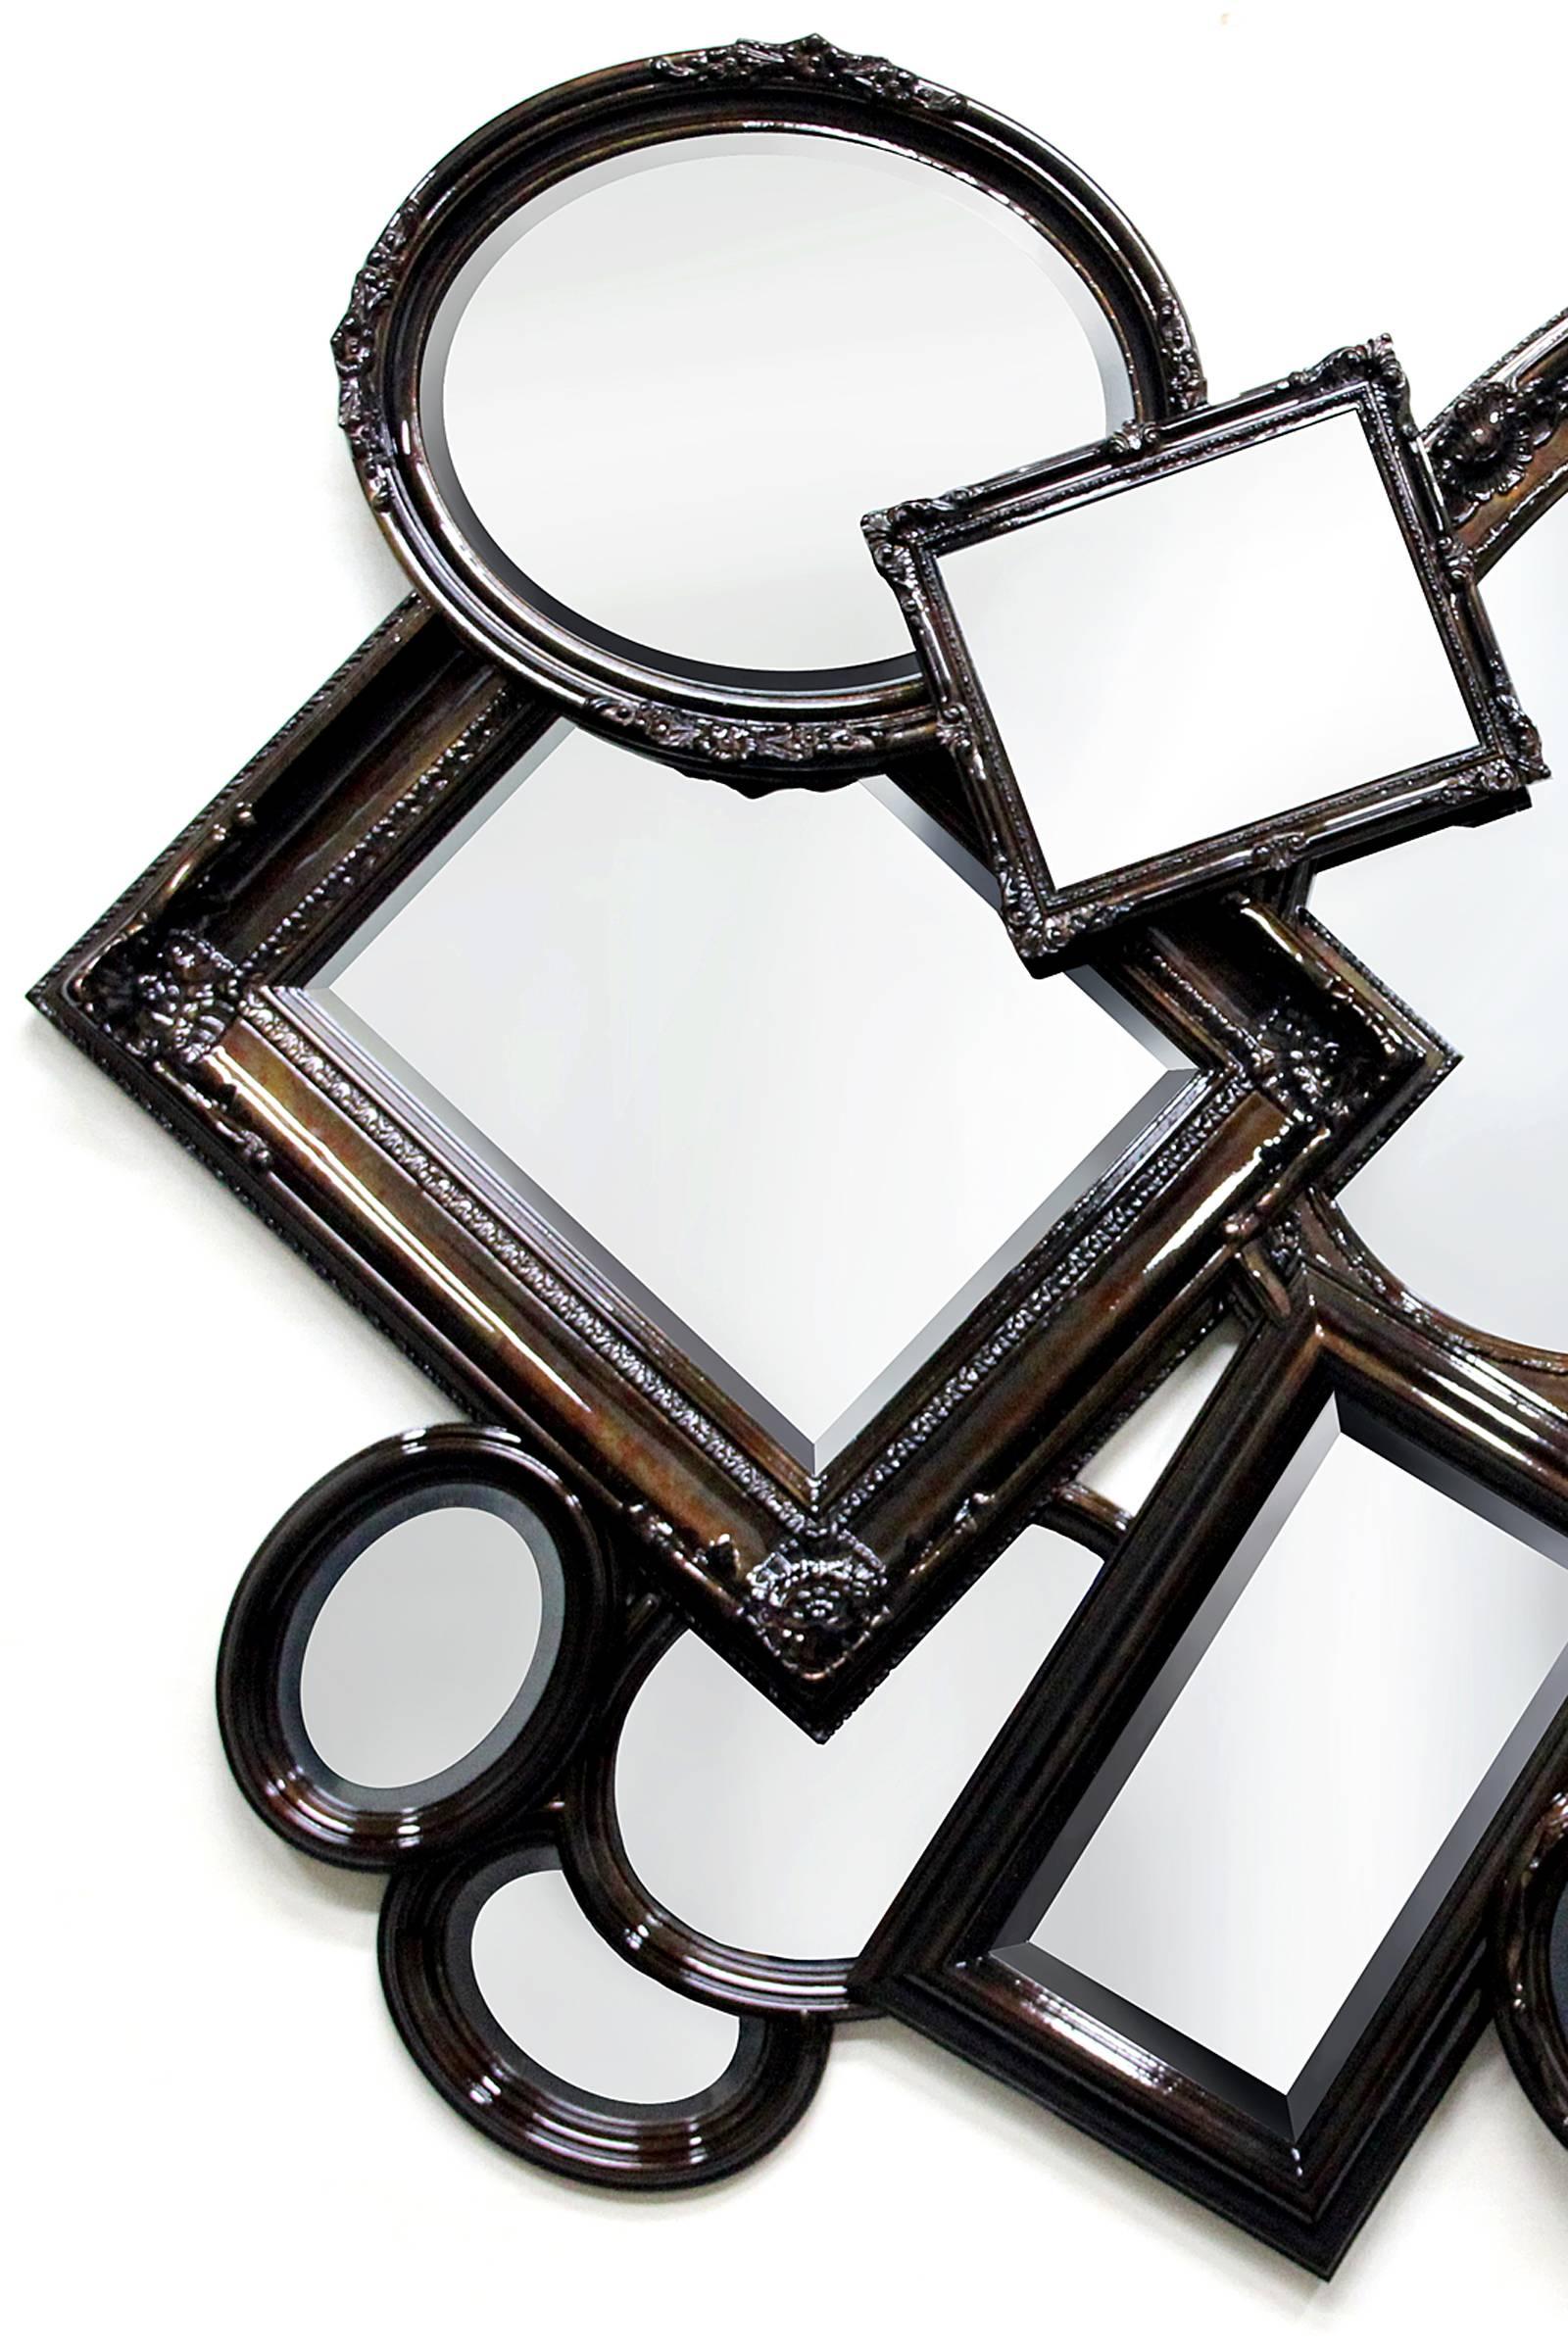 Multi frames mirror with 10 classic overlapped mirrors in 
solid mahogany wood with different sizes and frames finished 
in copper leaf, rusted in high brilliance and grey mirror. 
Also available with Gold leaf or silver leaf.
